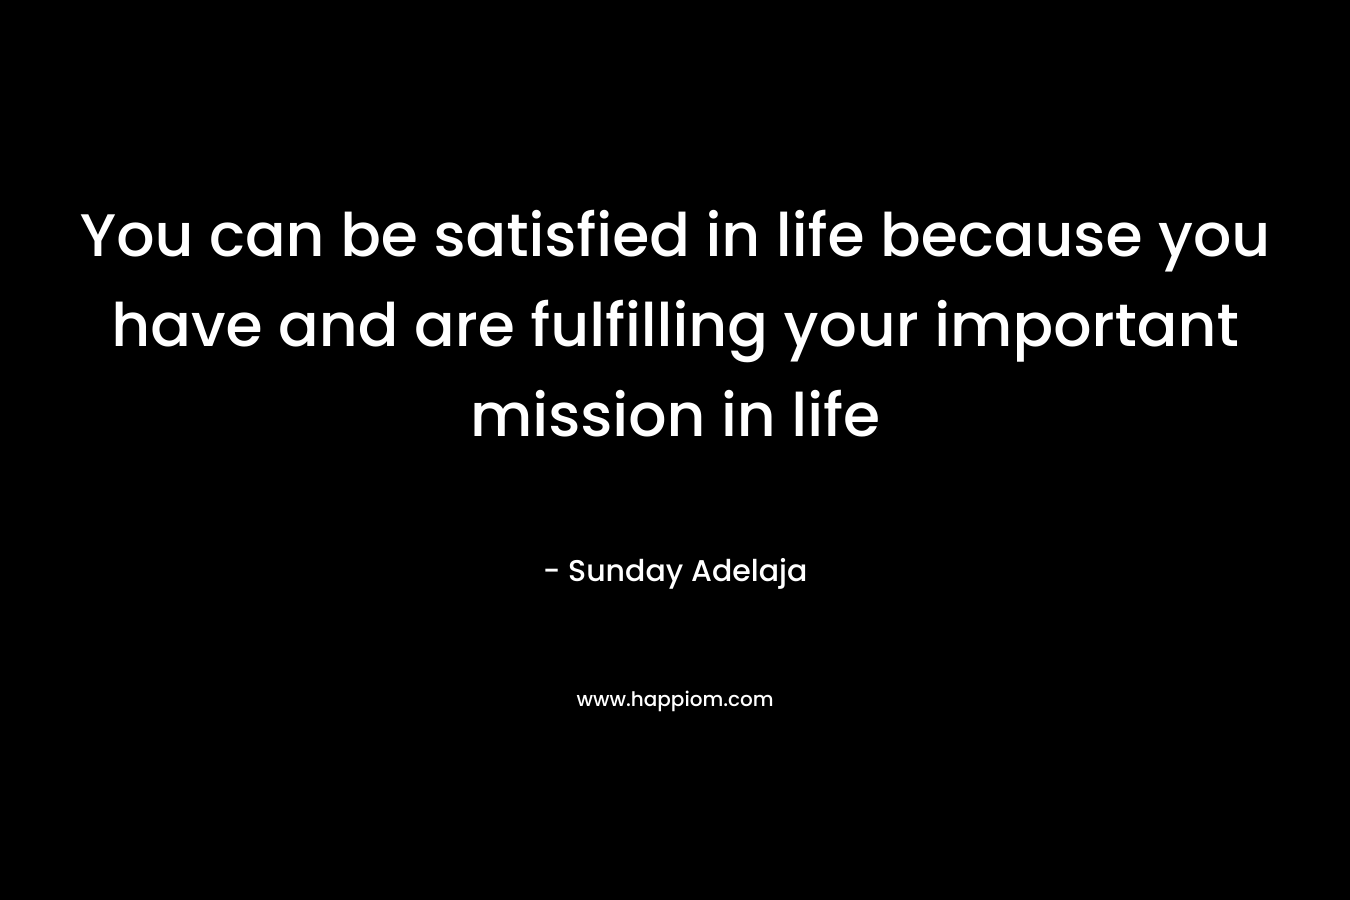 You can be satisfied in life because you have and are fulfilling your important mission in life